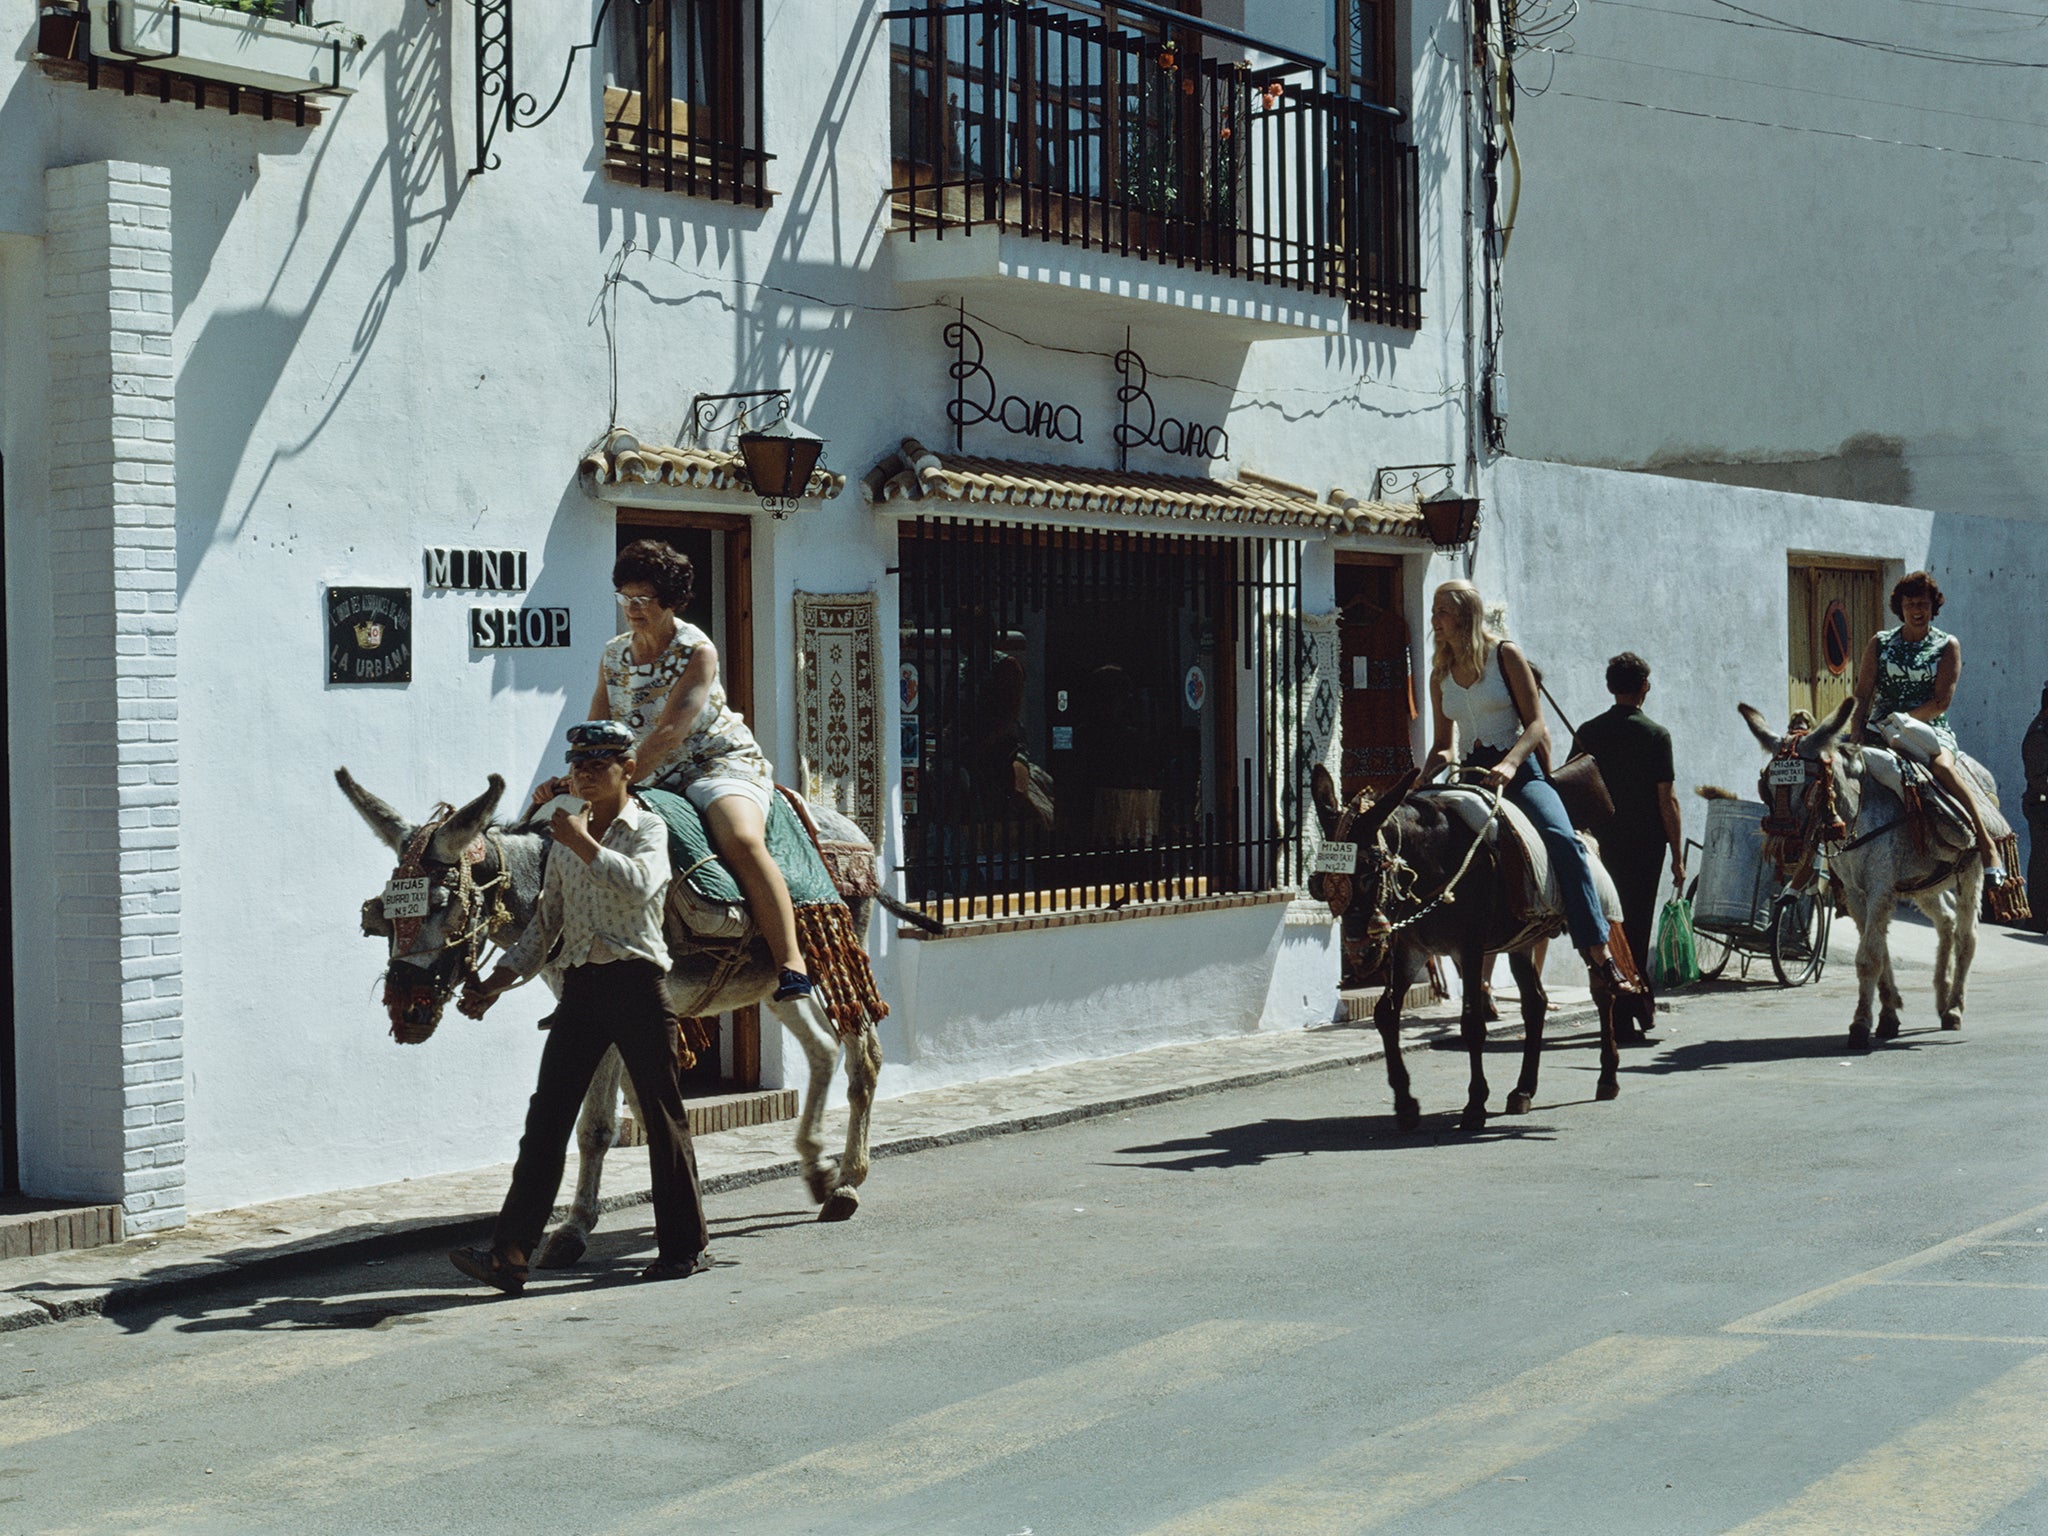 The village of Mijas is best-known for having donkeys as taxis